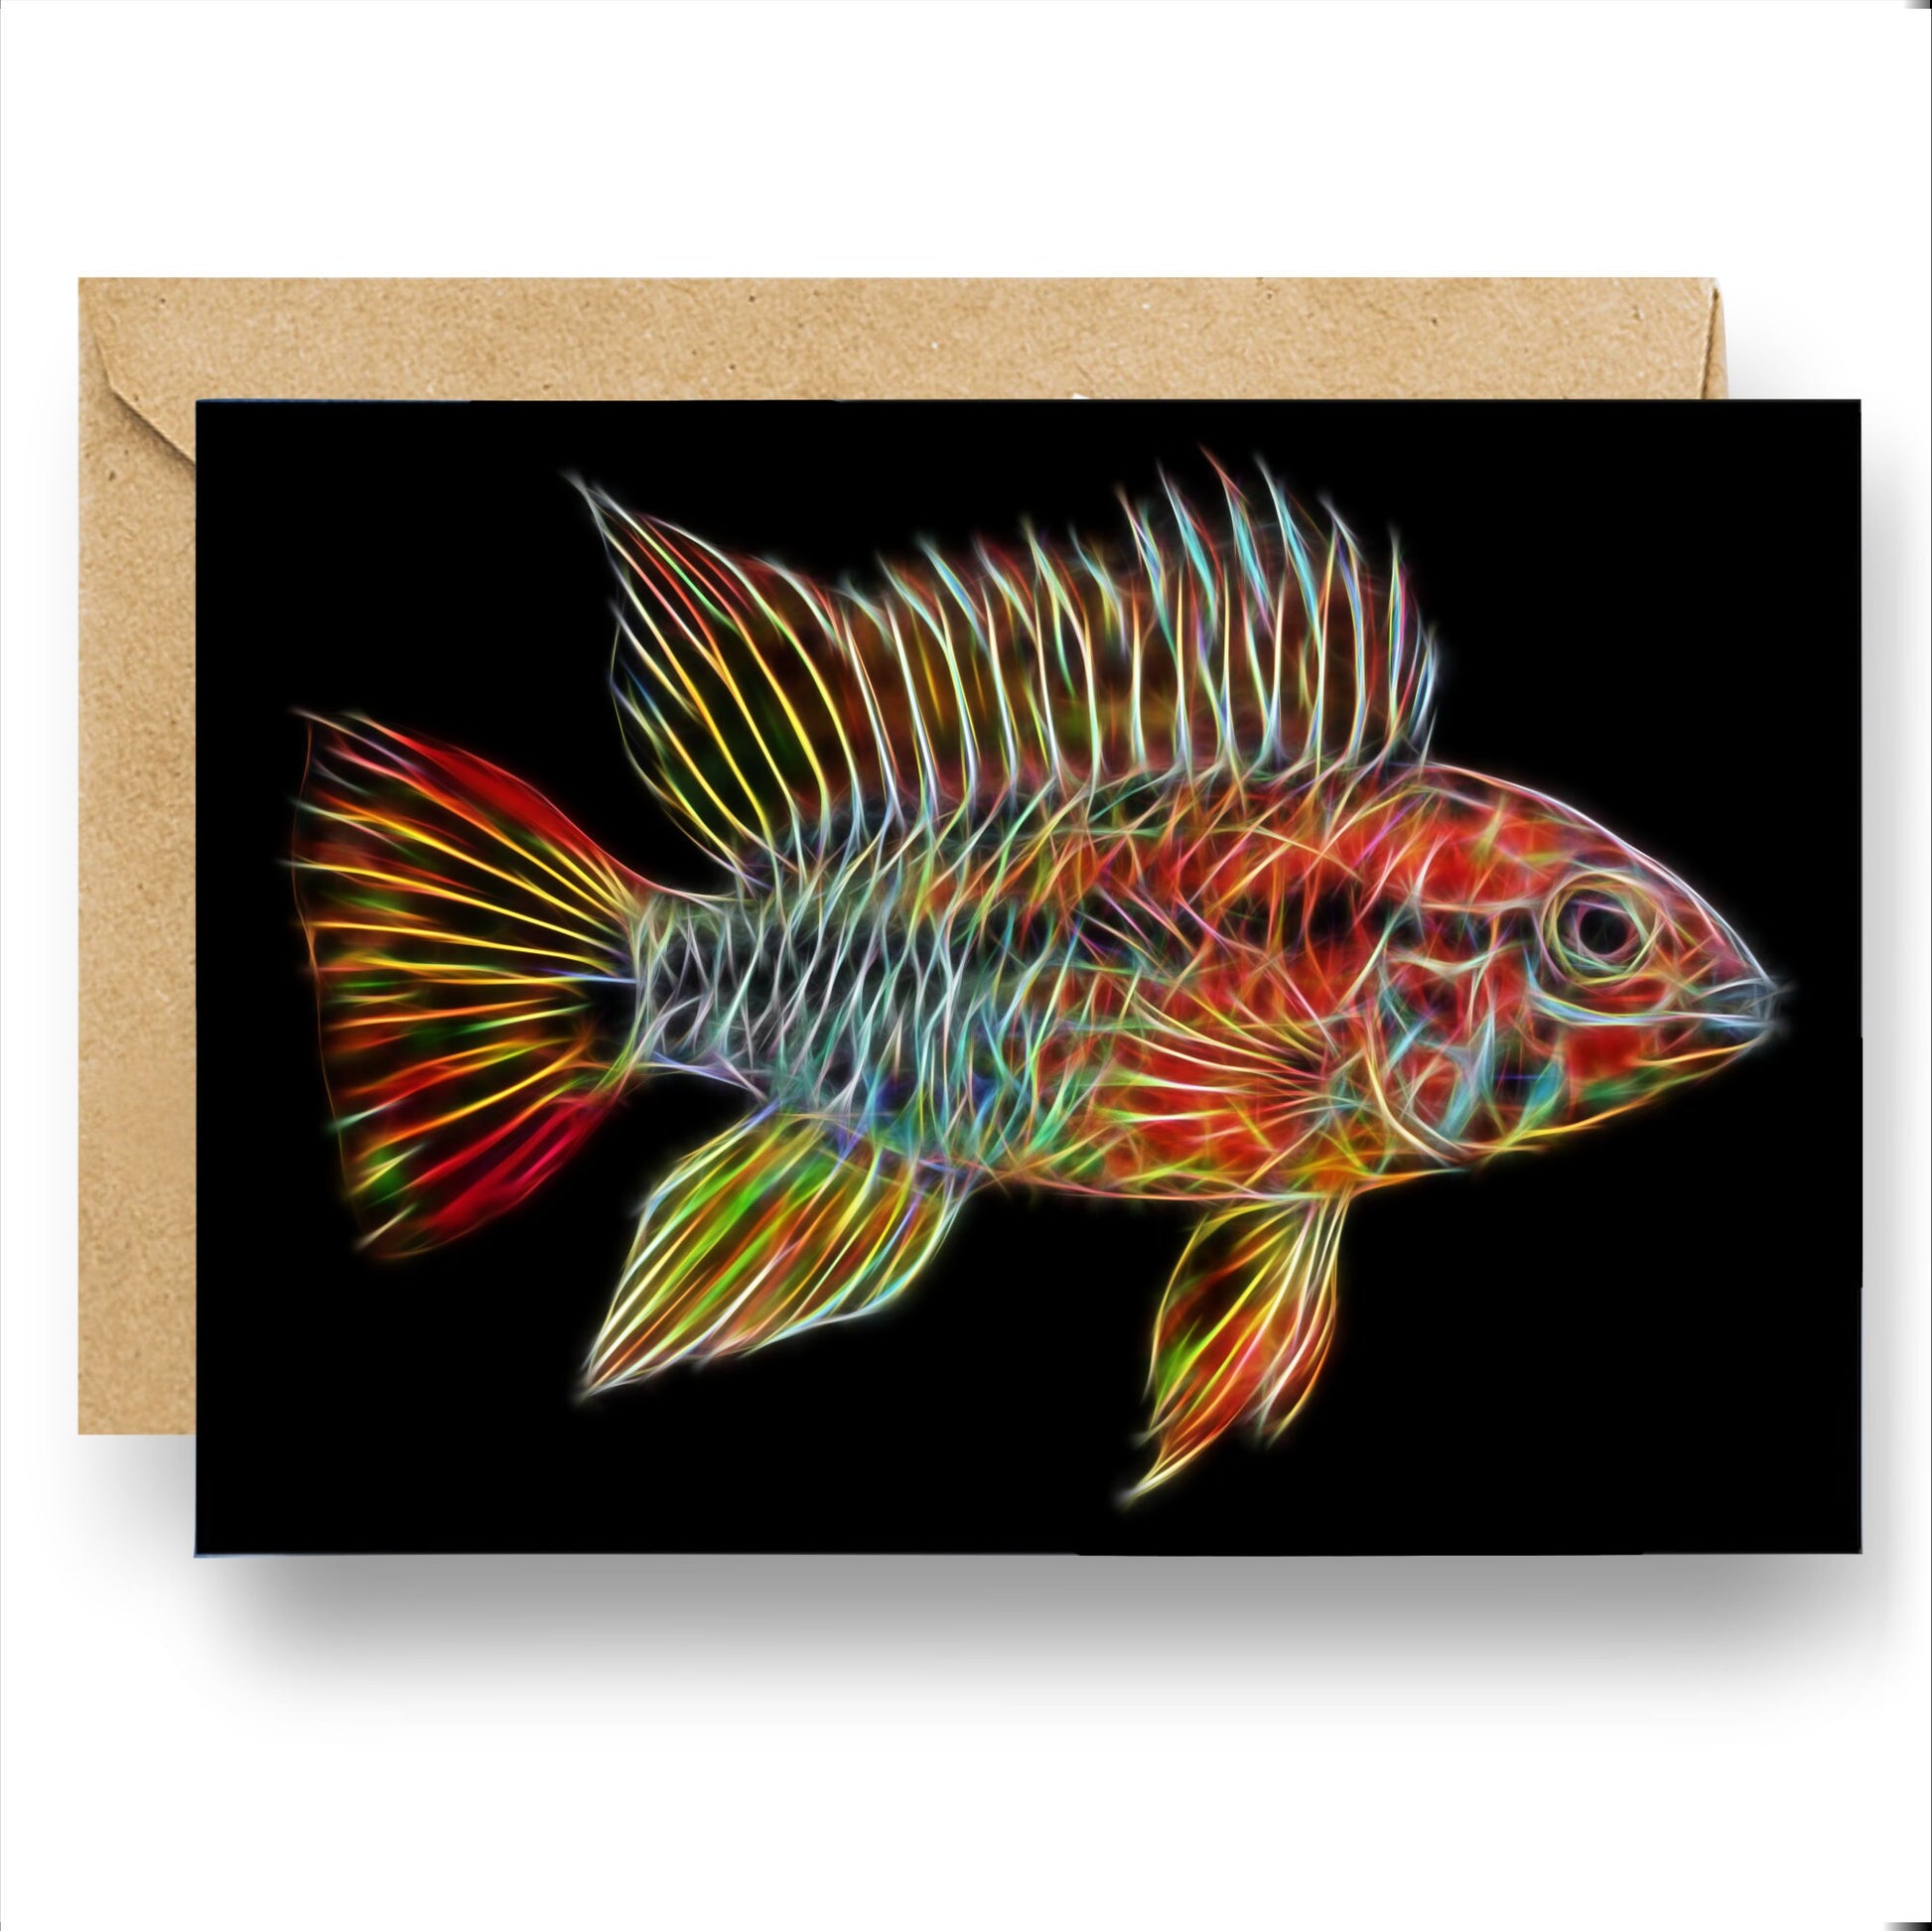 Apistogramma Cichlid Fish Greeting Card with Stunning Fractal Art Design (Blank Inside). A Selection of Designs.